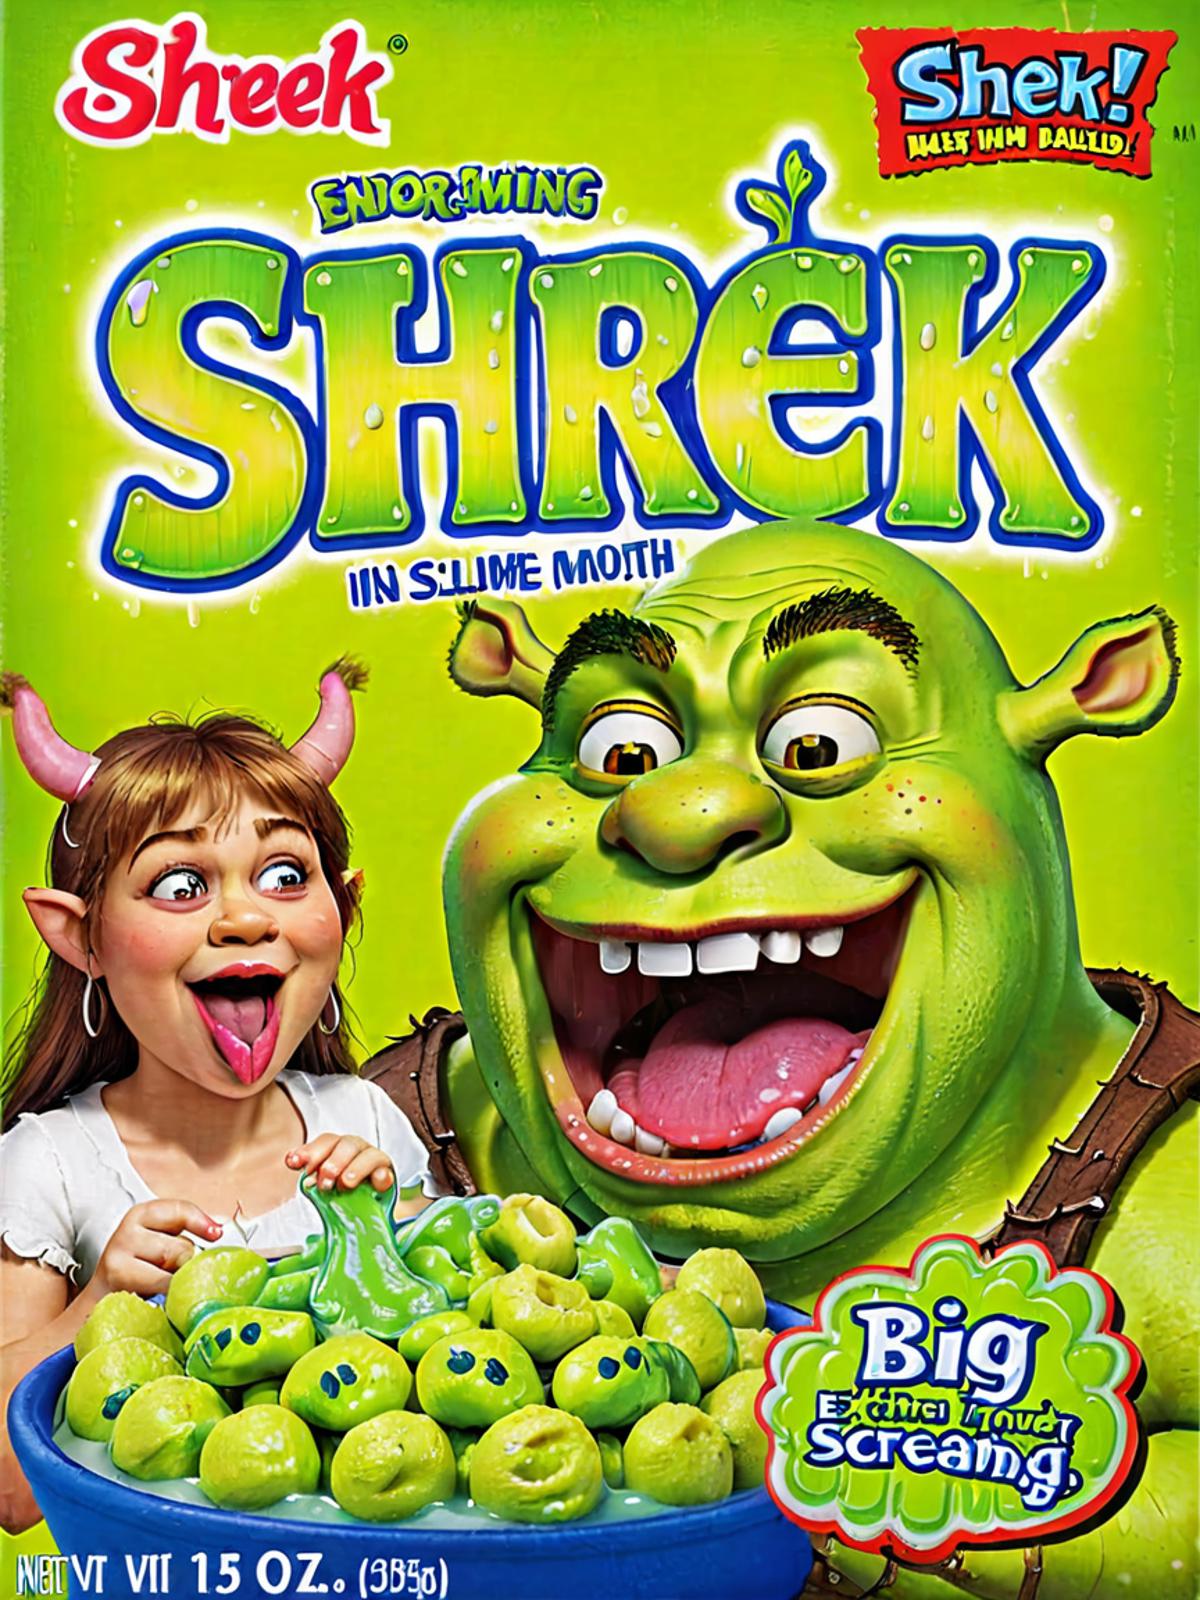 A green Shrek in slime mold on a green box with a girl sticking her tongue out.